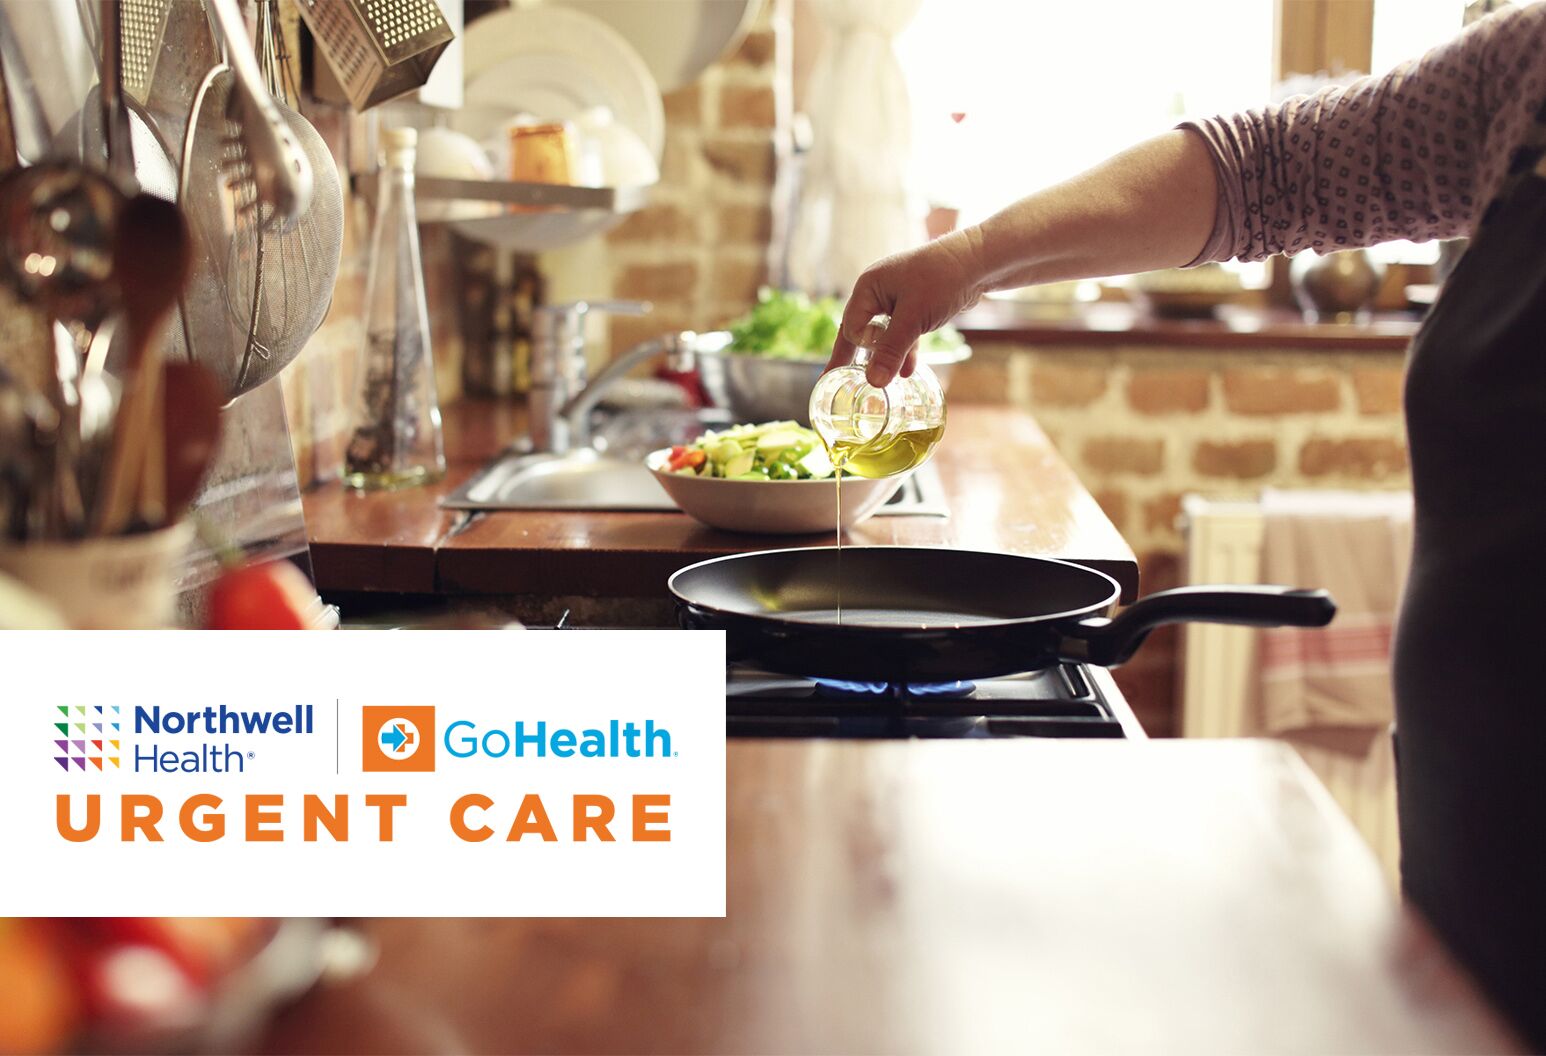 https://dam.northwell.edu/m/7ad5abab155eb4ce/Drupal-TheWell_kitchen-safety-tips_GettyImages-921956902.jpg